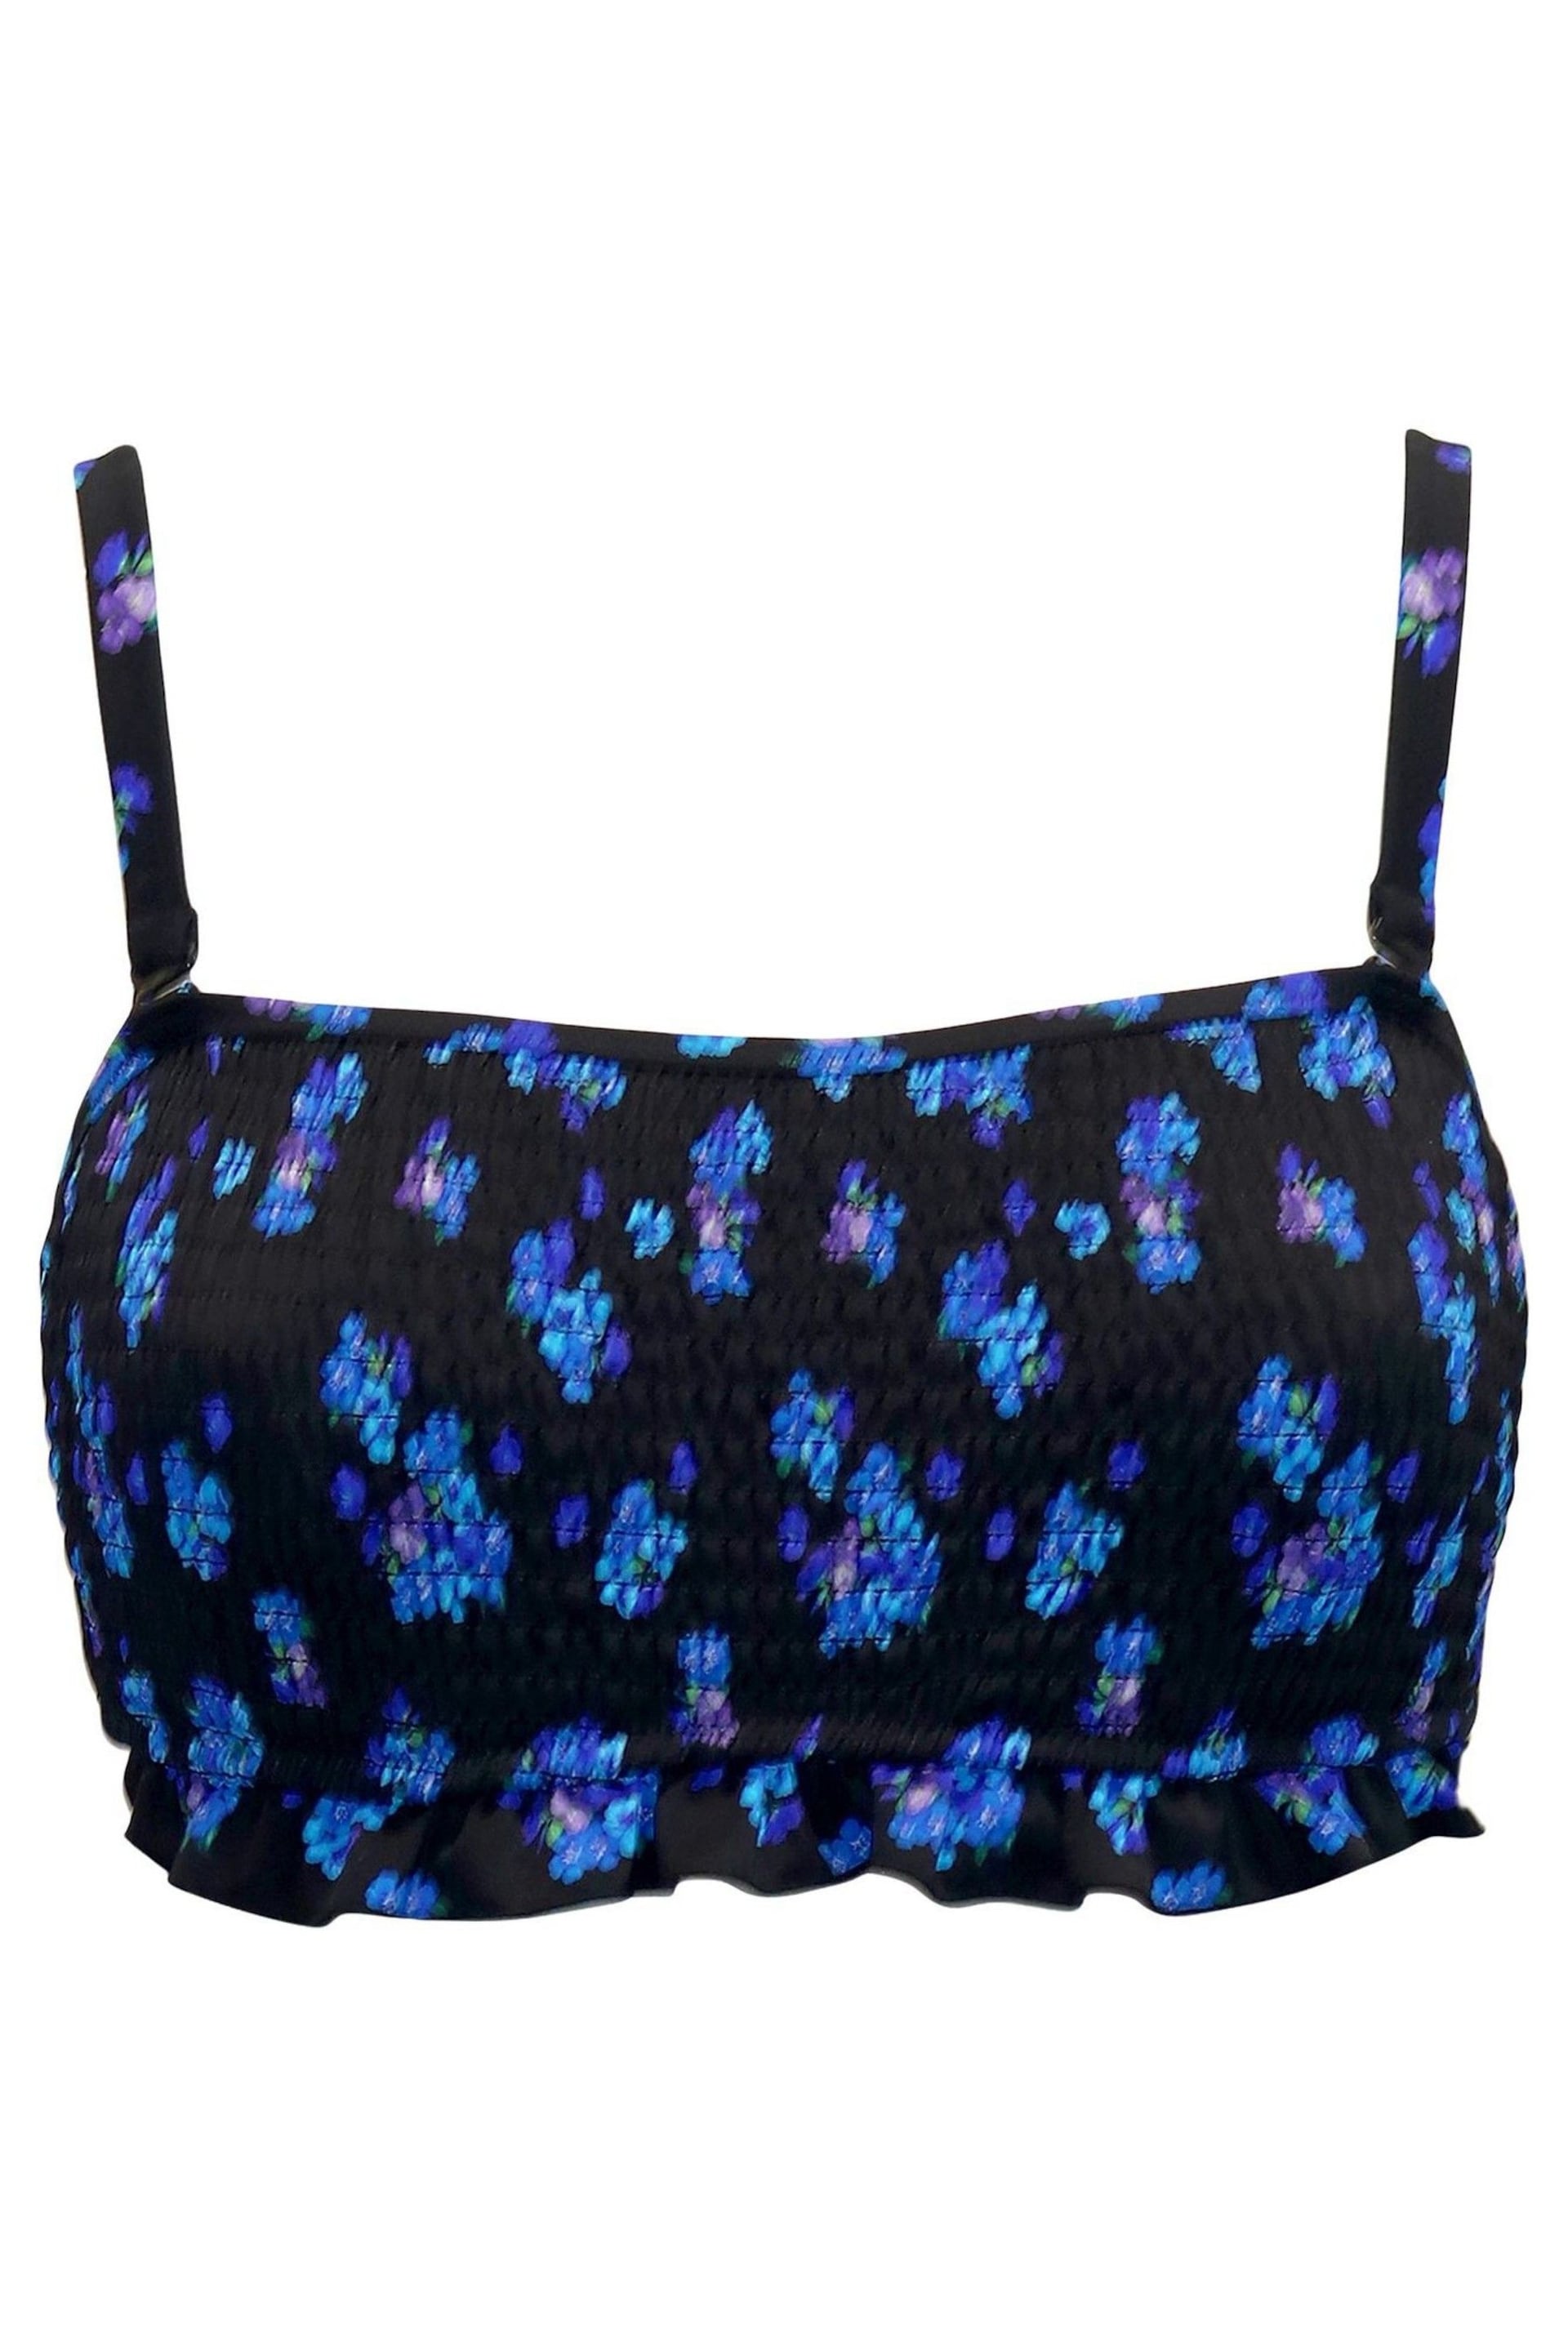 Pour Moi Black & Blue Free Spirit Strapless Shirred Bandeau Underwired Top - Image 3 of 4